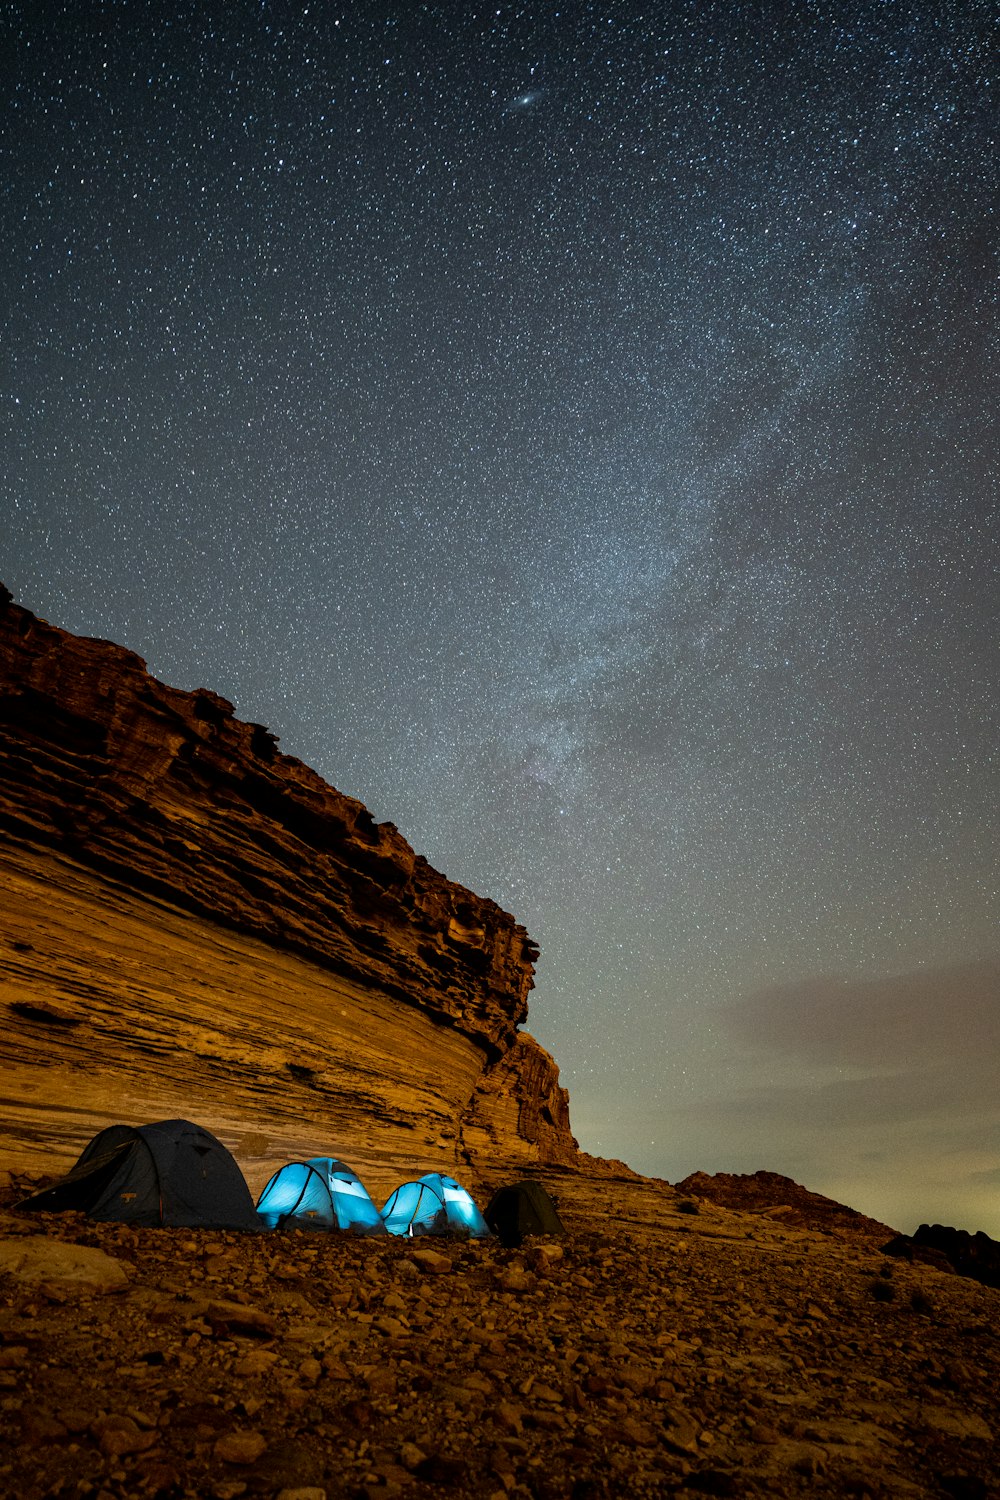 a tent and a tent in a rocky area with a starry sky above